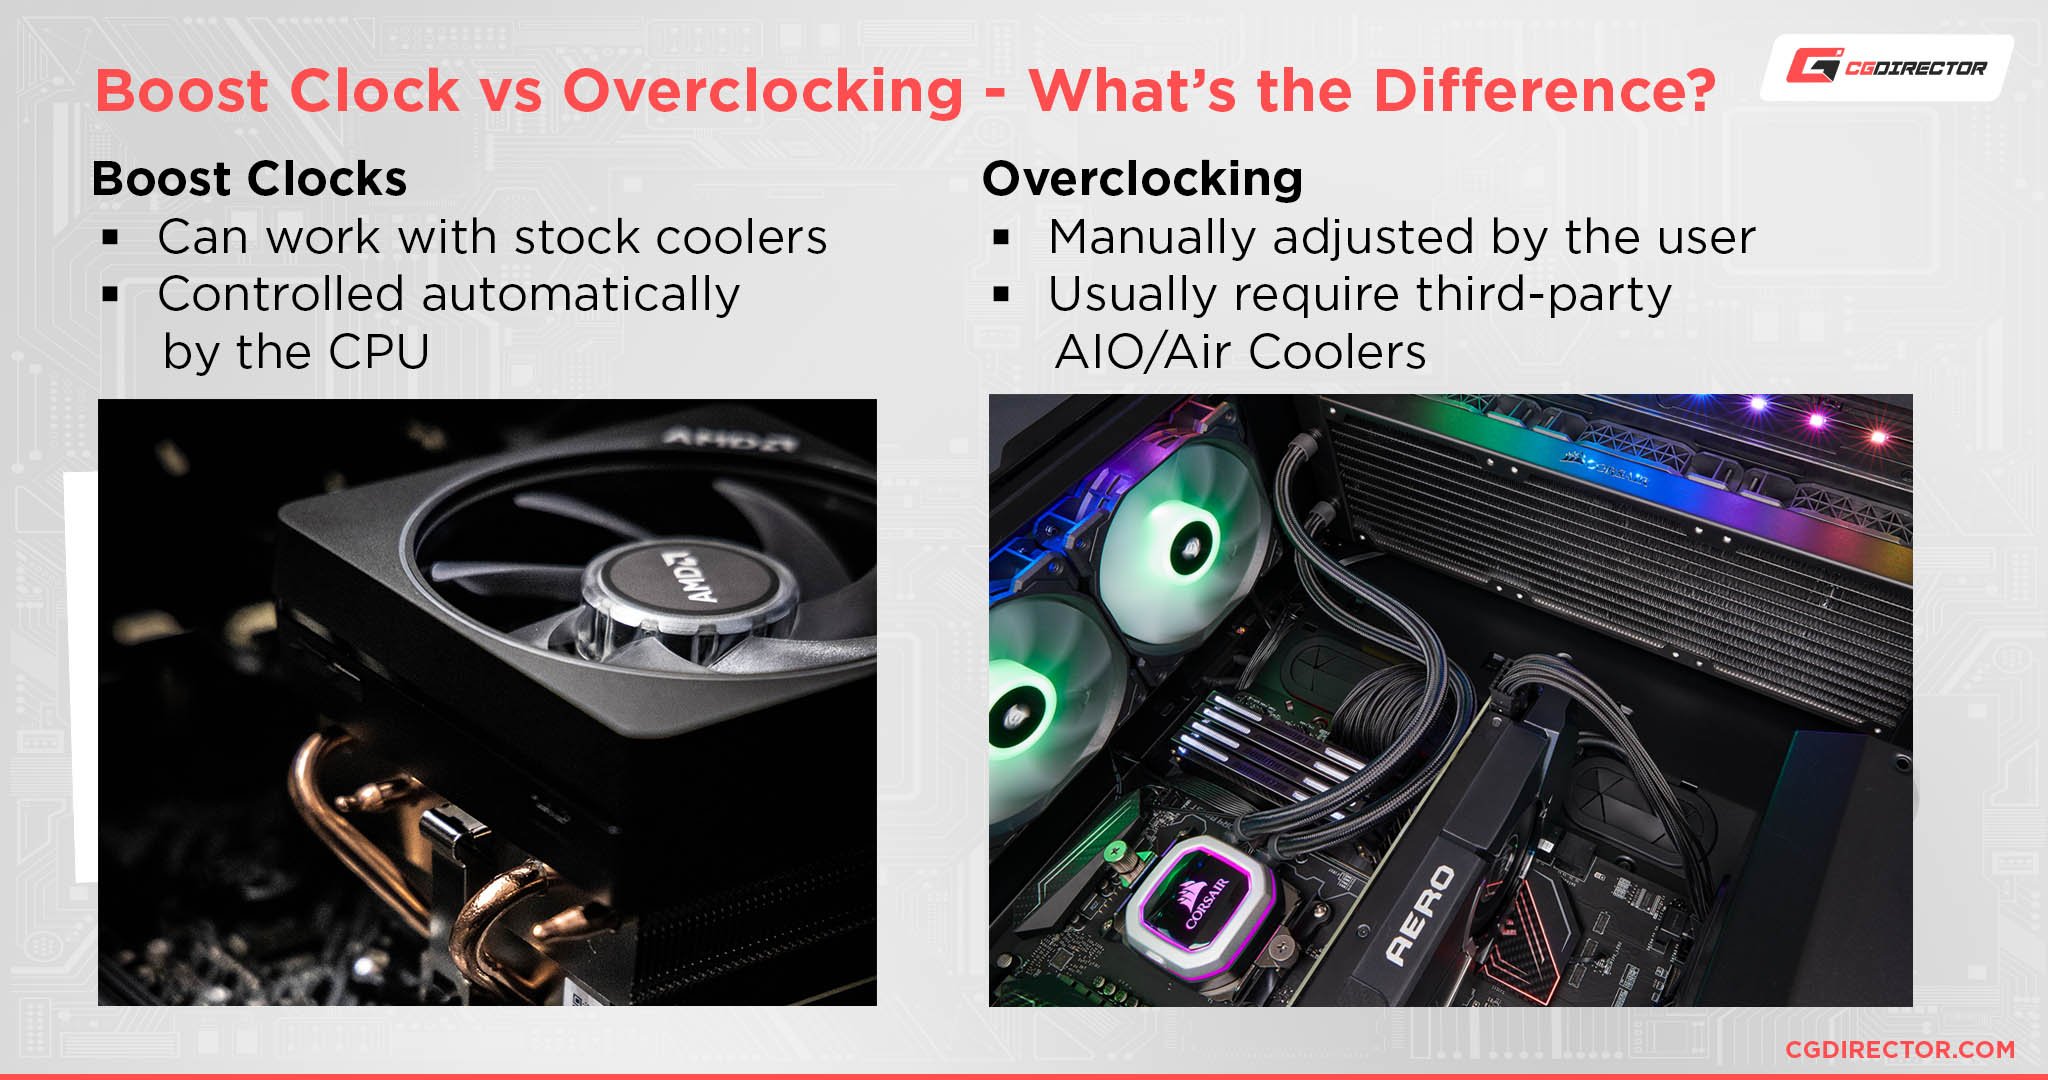 Boost Clock vs Overclocking - What’s the Difference